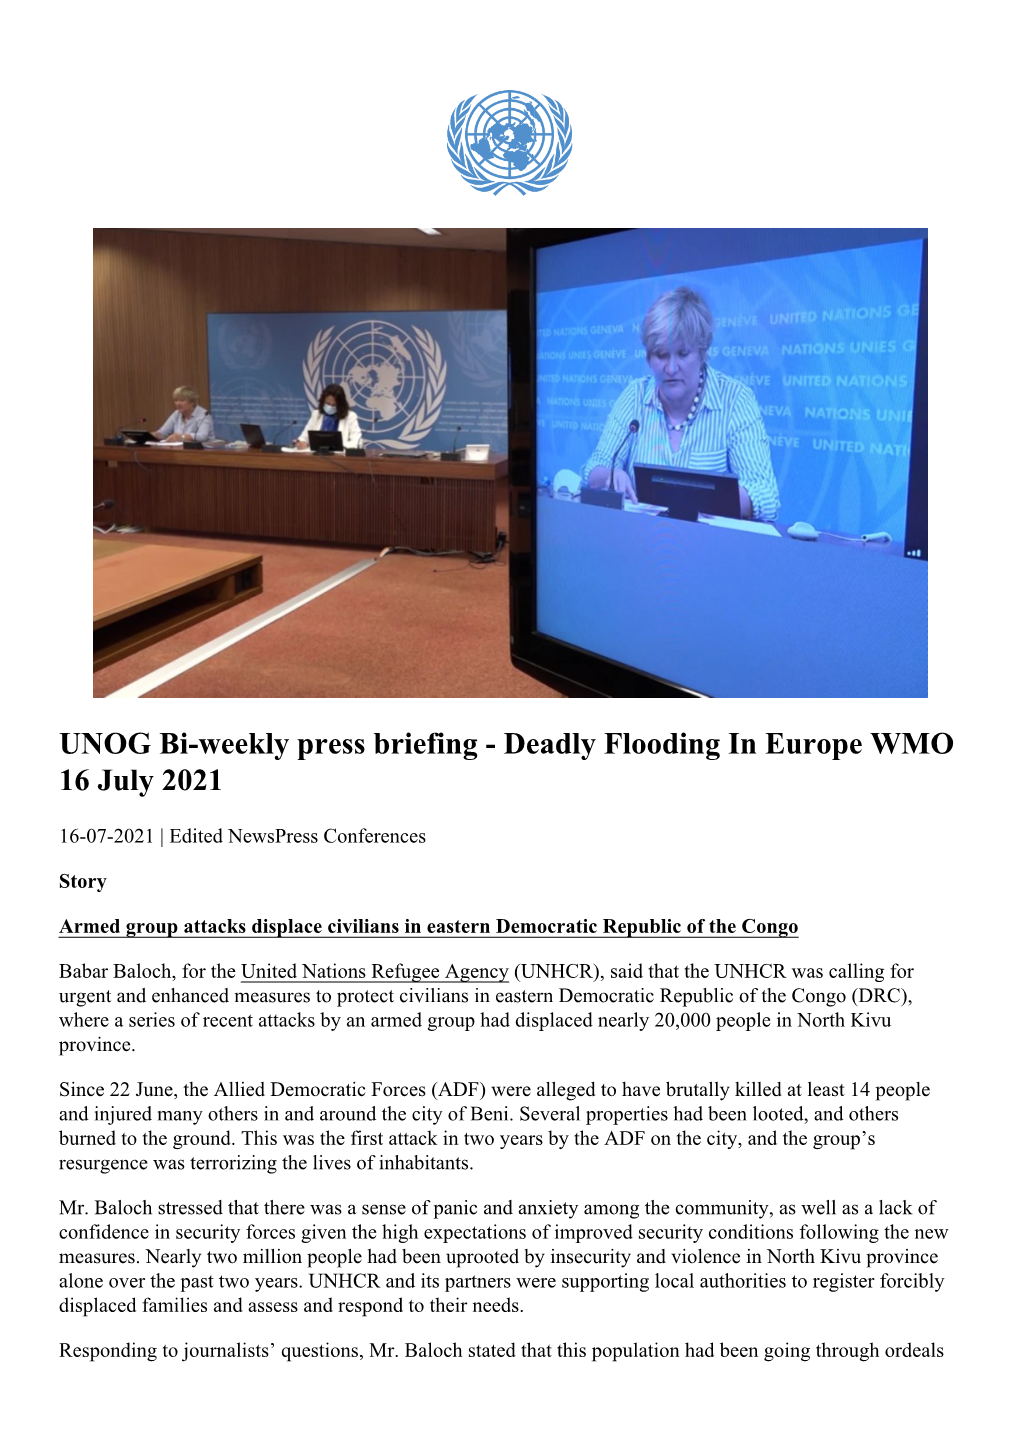 Deadly Flooding in Europe WMO 16 July 2021